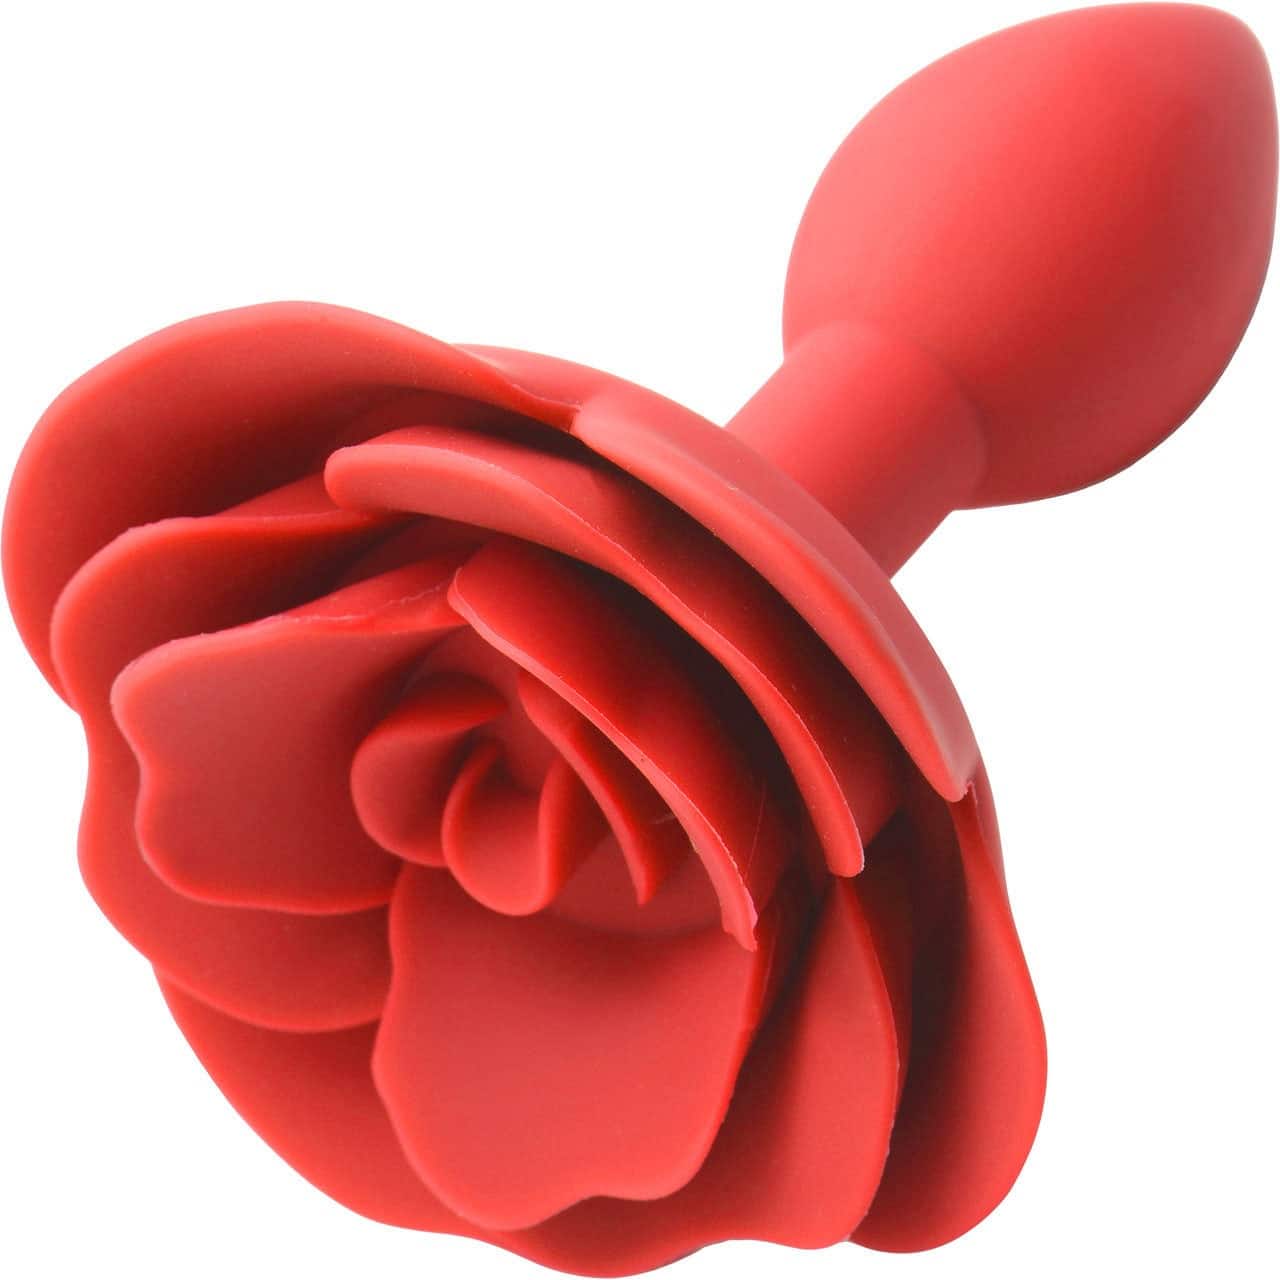 Master Series Booty Bloom - Rose Butt Plug